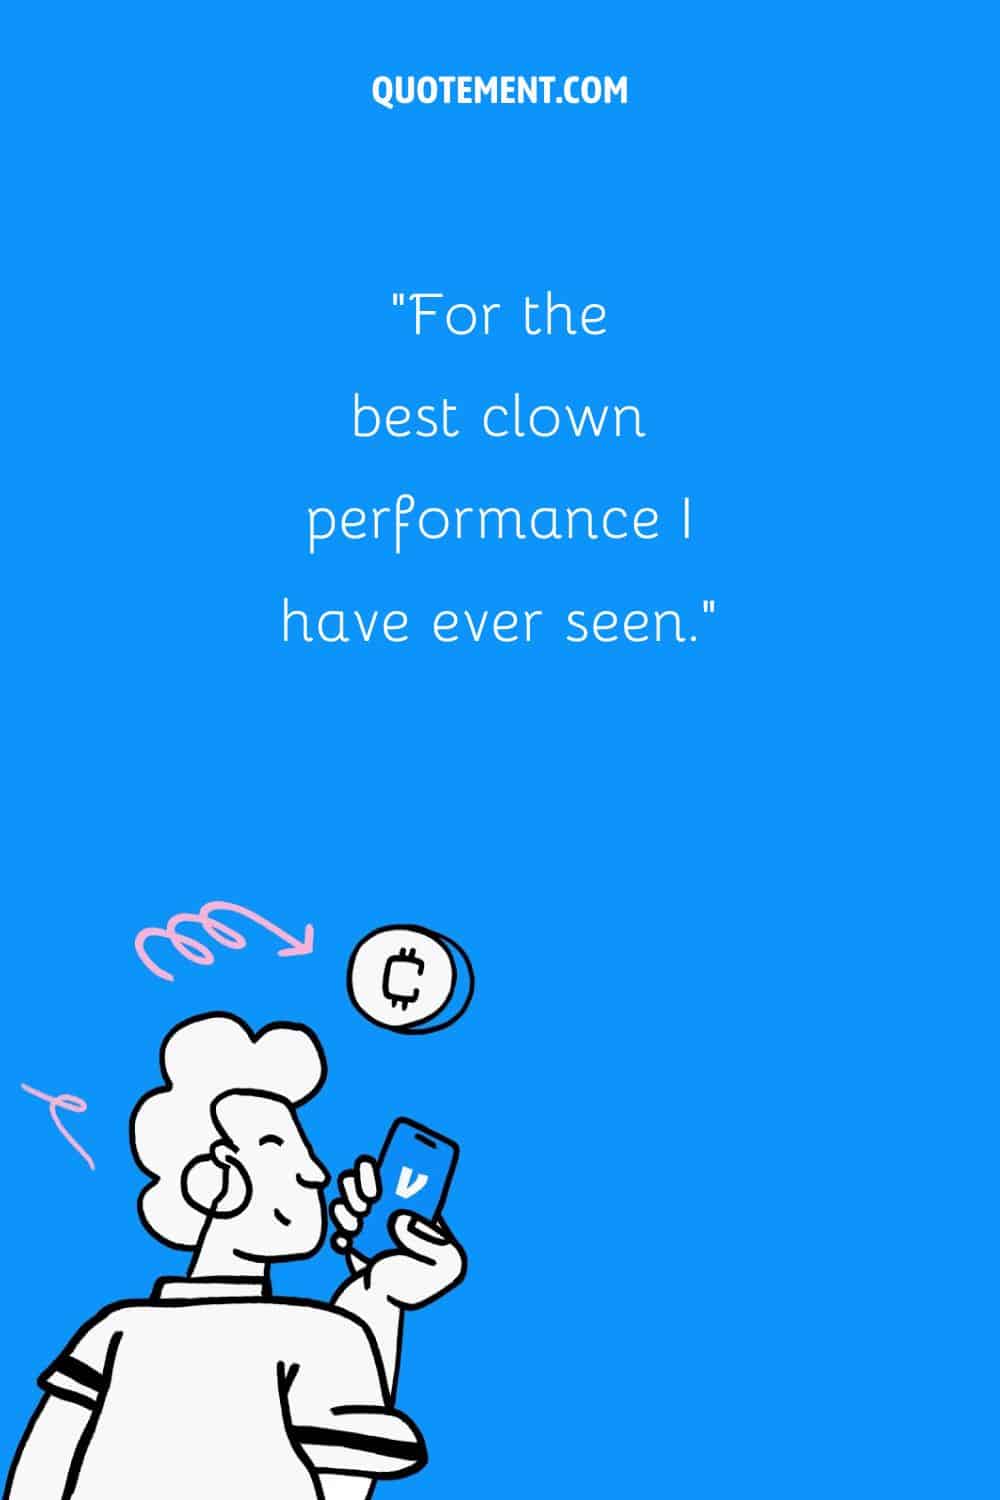 For the best clown performance I have ever seen